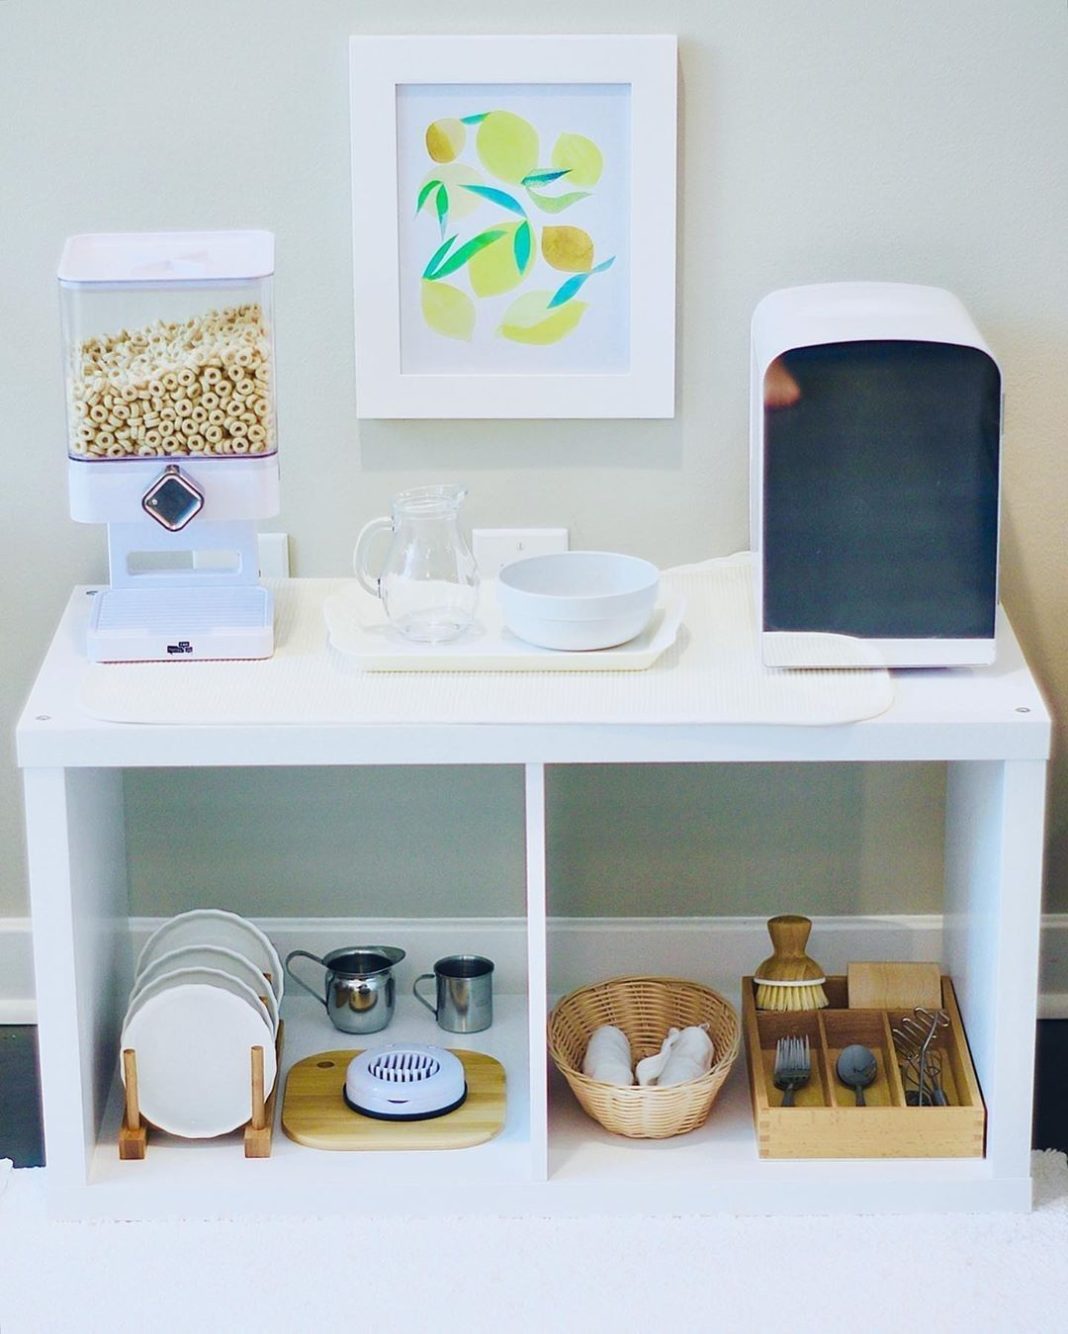 Montessori-inspired Kitchen Set-Ups For Practical Life: These Are Not Pretend! - Monti Kids